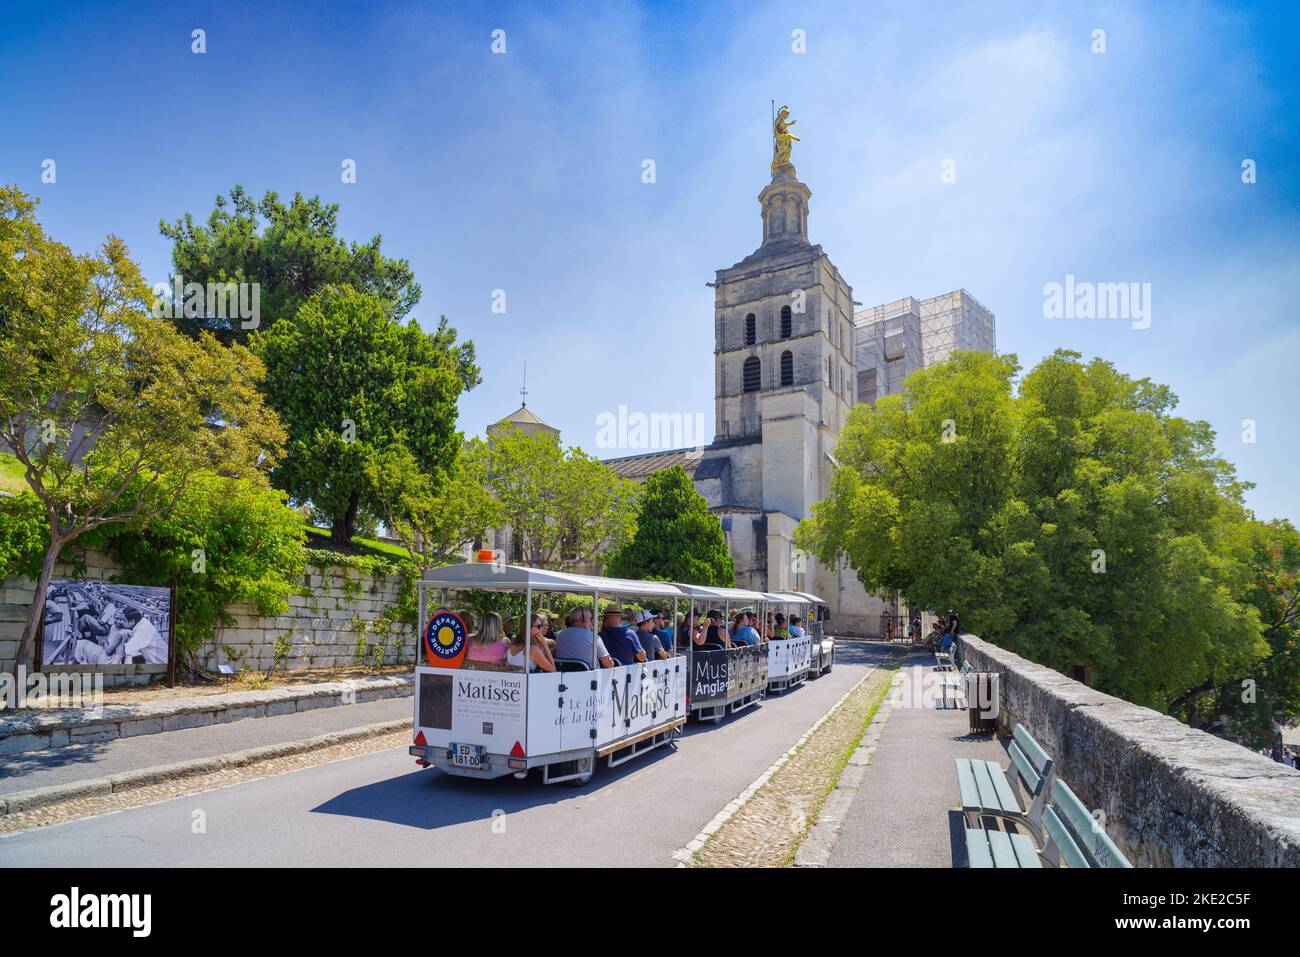 AVIGNON, FRANCE - AUGUST 4, 2022: Tourists in a sightseeing train on their way to the palace of the popes palace des popes). Stock Photo